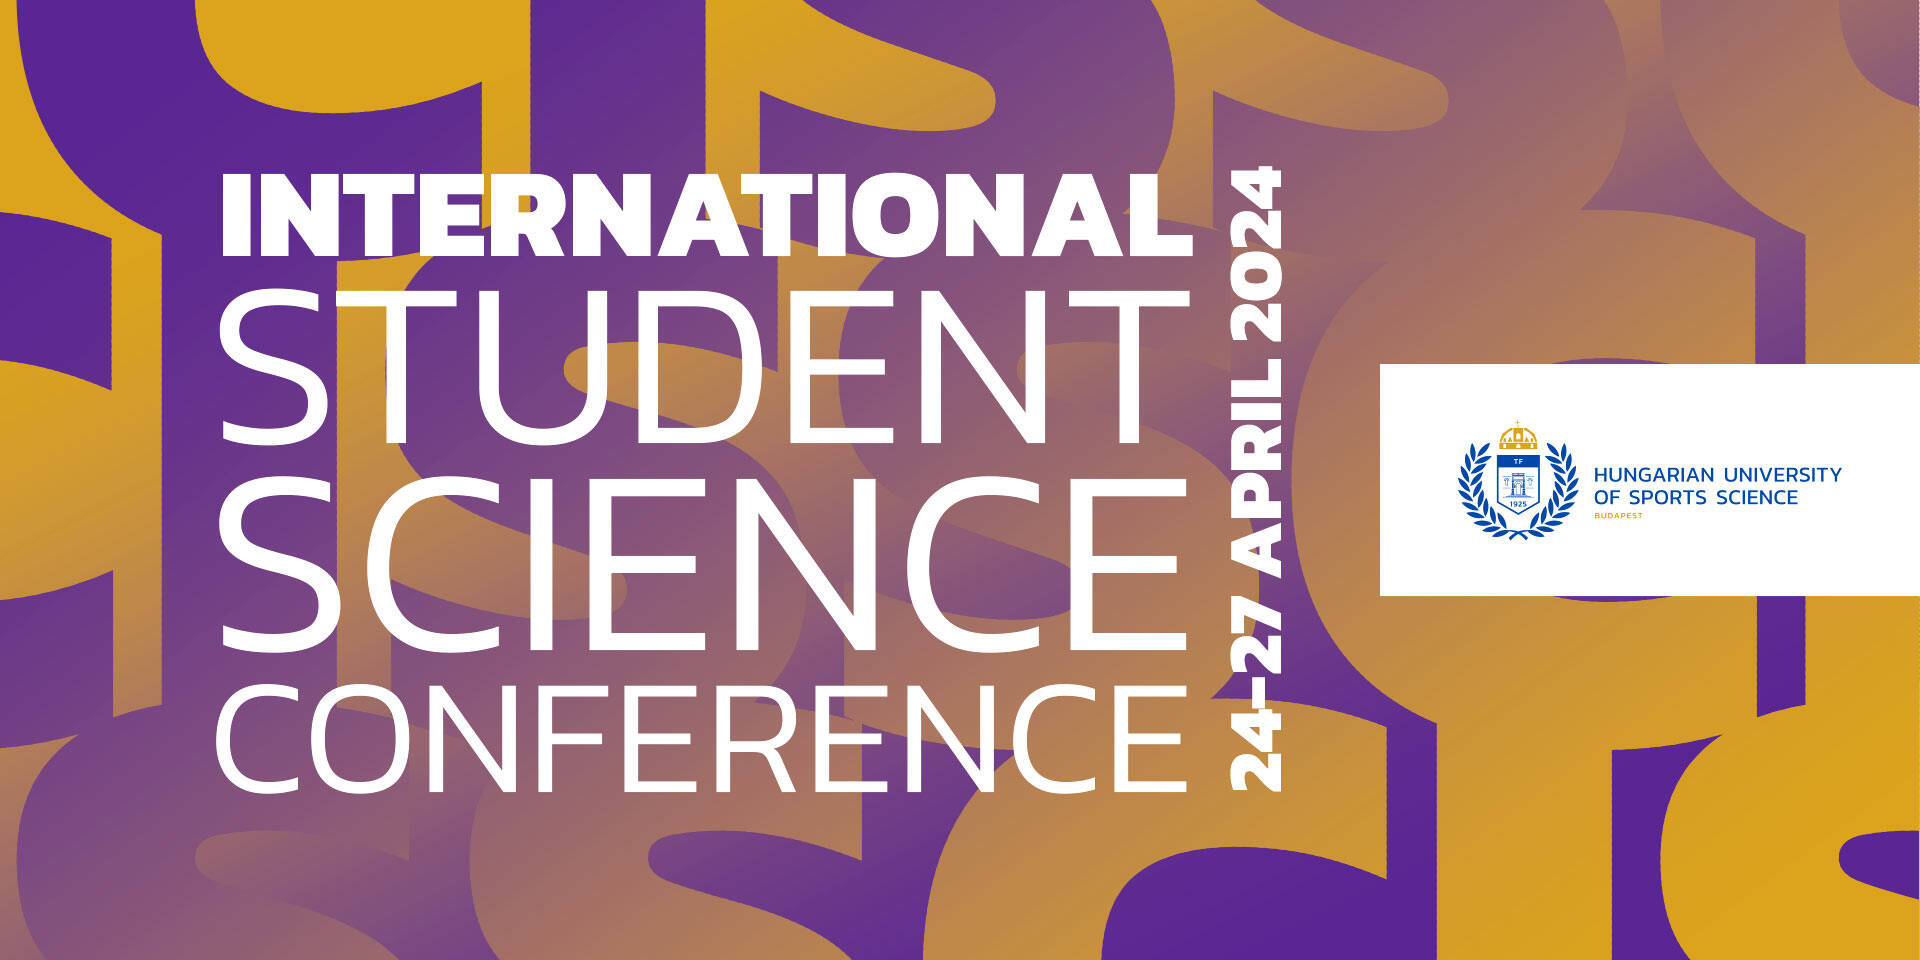 Registration is open for the International Student Science Conference